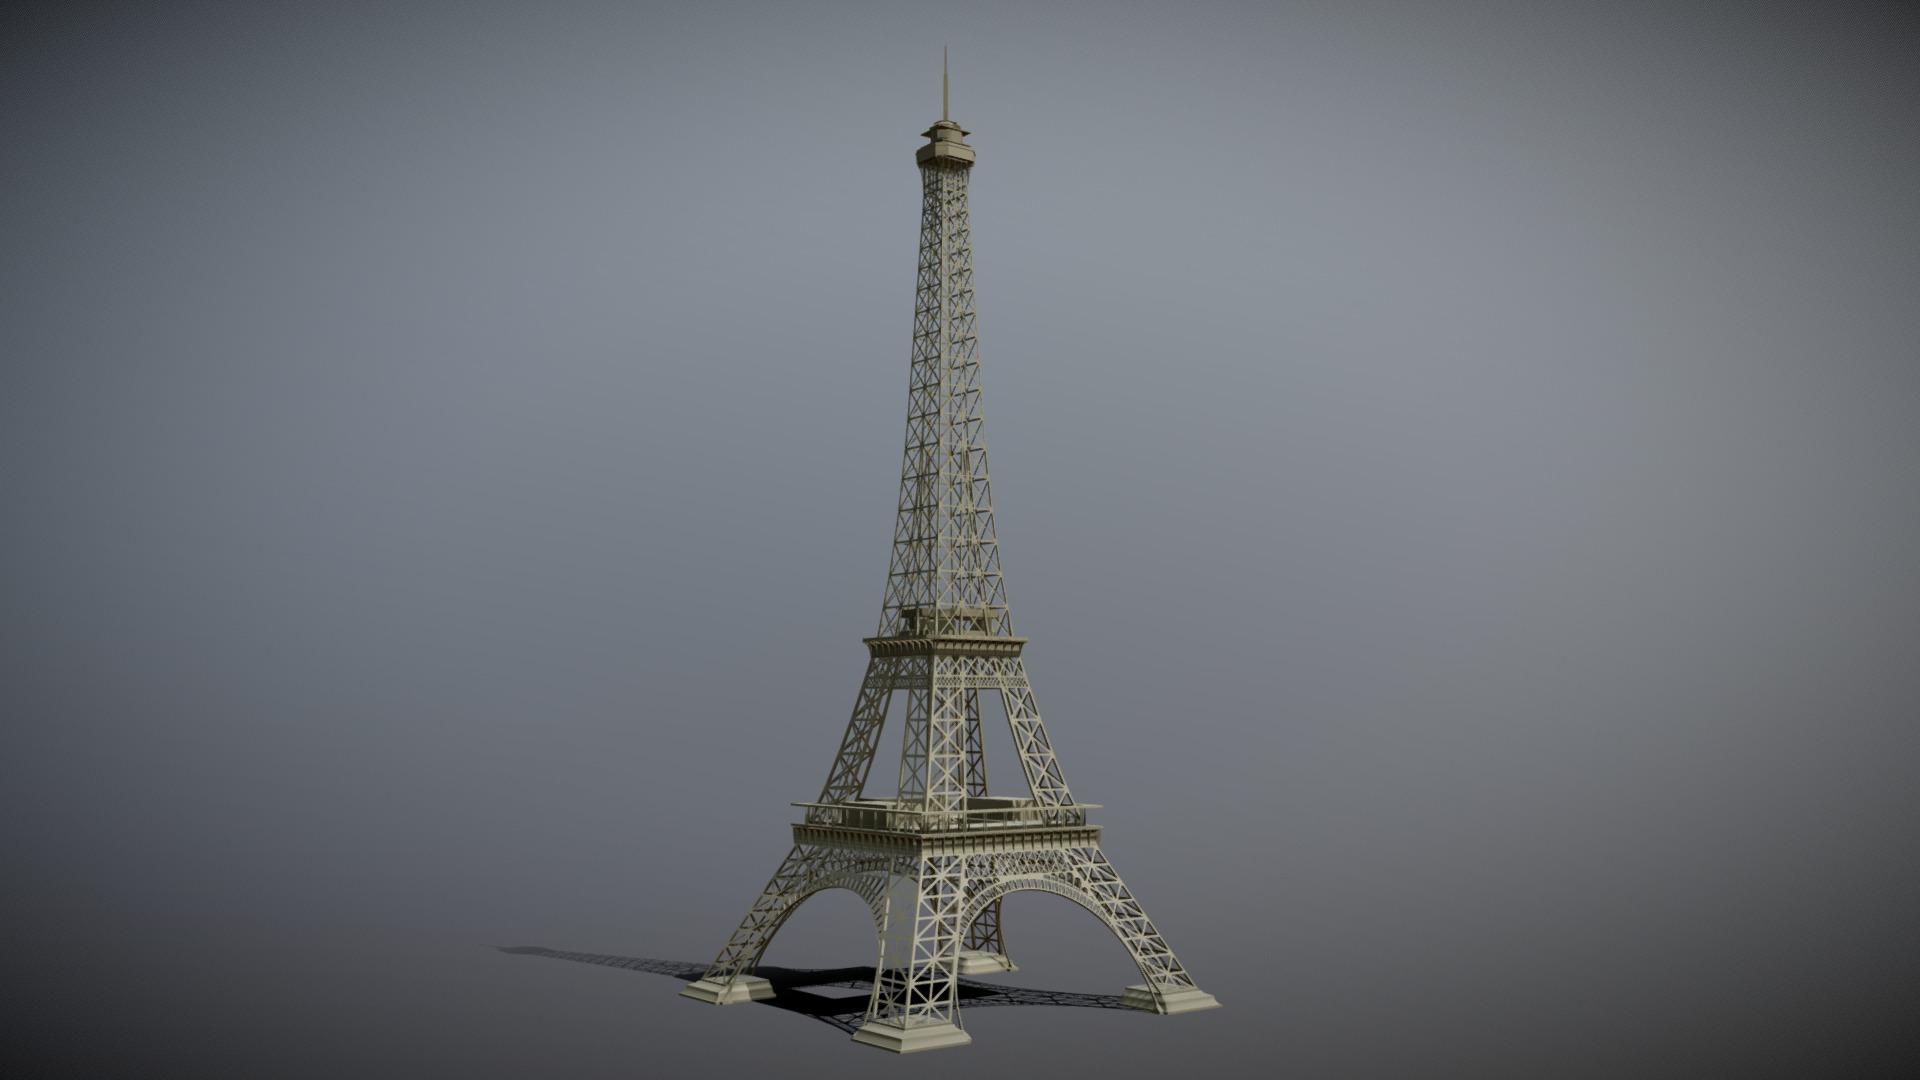 3D model Eiffel Tower in Paris France - This is a 3D model of the Eiffel Tower in Paris France. The 3D model is about a tall metal tower.